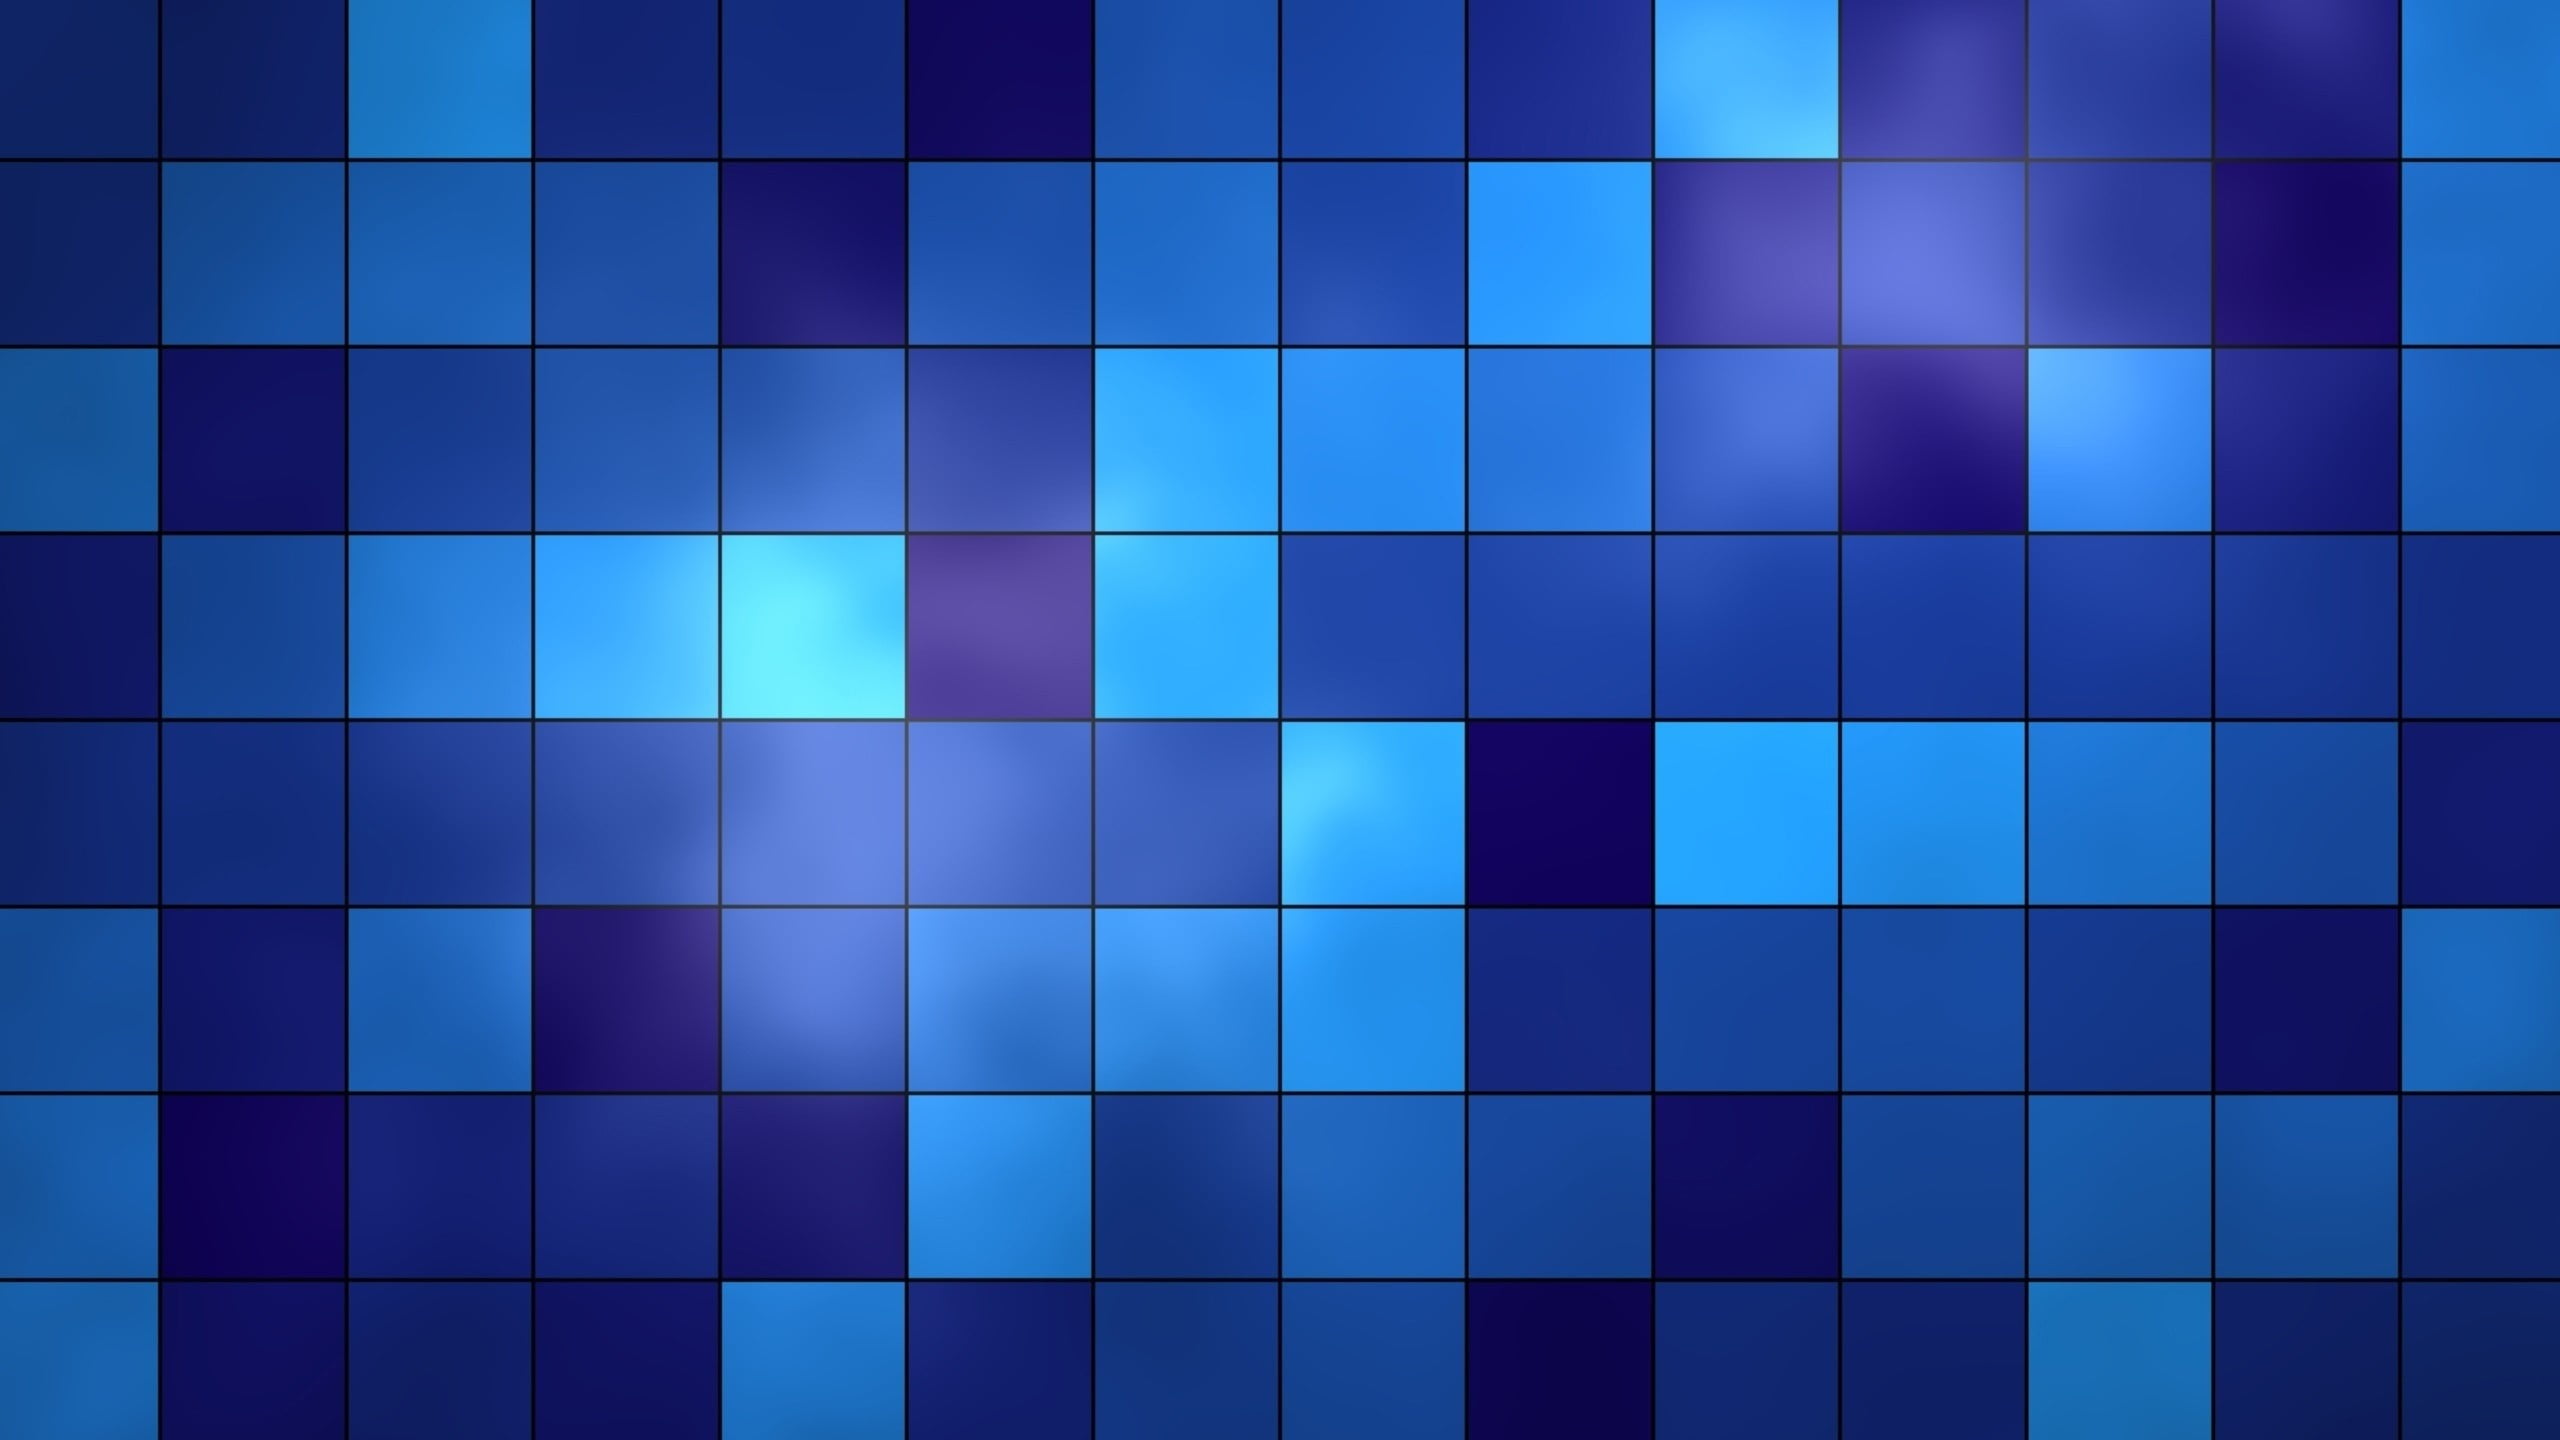 Blue And White Checkered Wallpaper 50 images